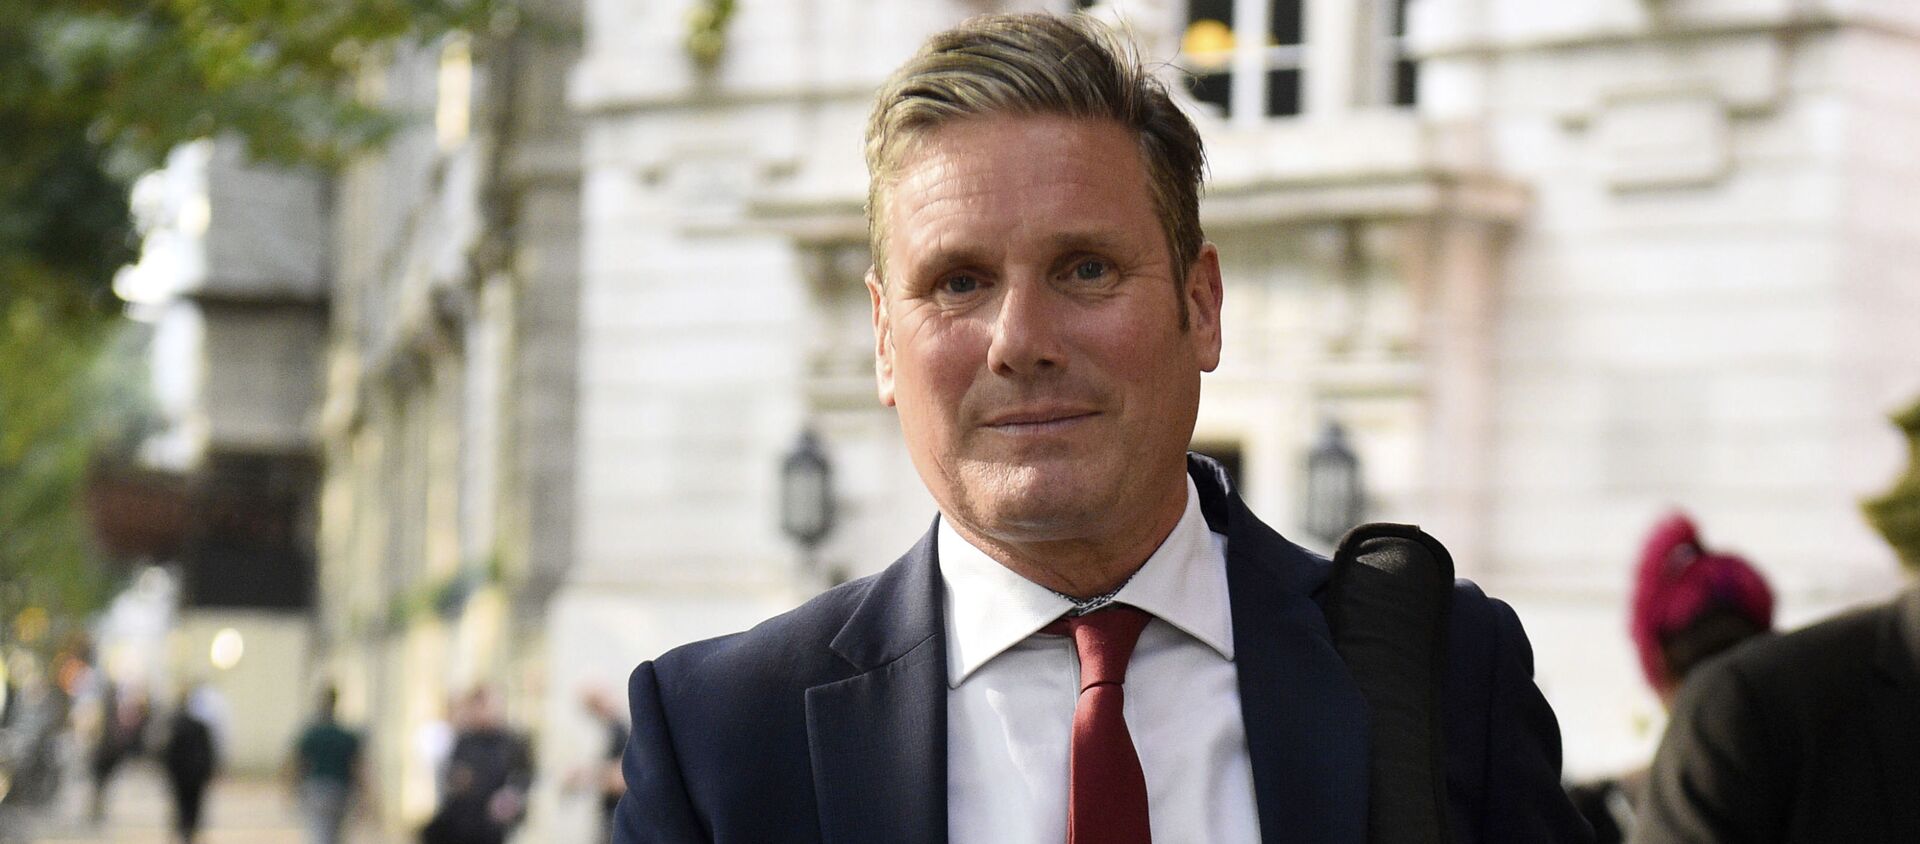 Keir Starmer, Britain's main opposition Labour Party Shadow Secretary of State for Exiting the European Union, in central London, Tuesday Aug. 27, 2019 - Sputnik International, 1920, 07.04.2021